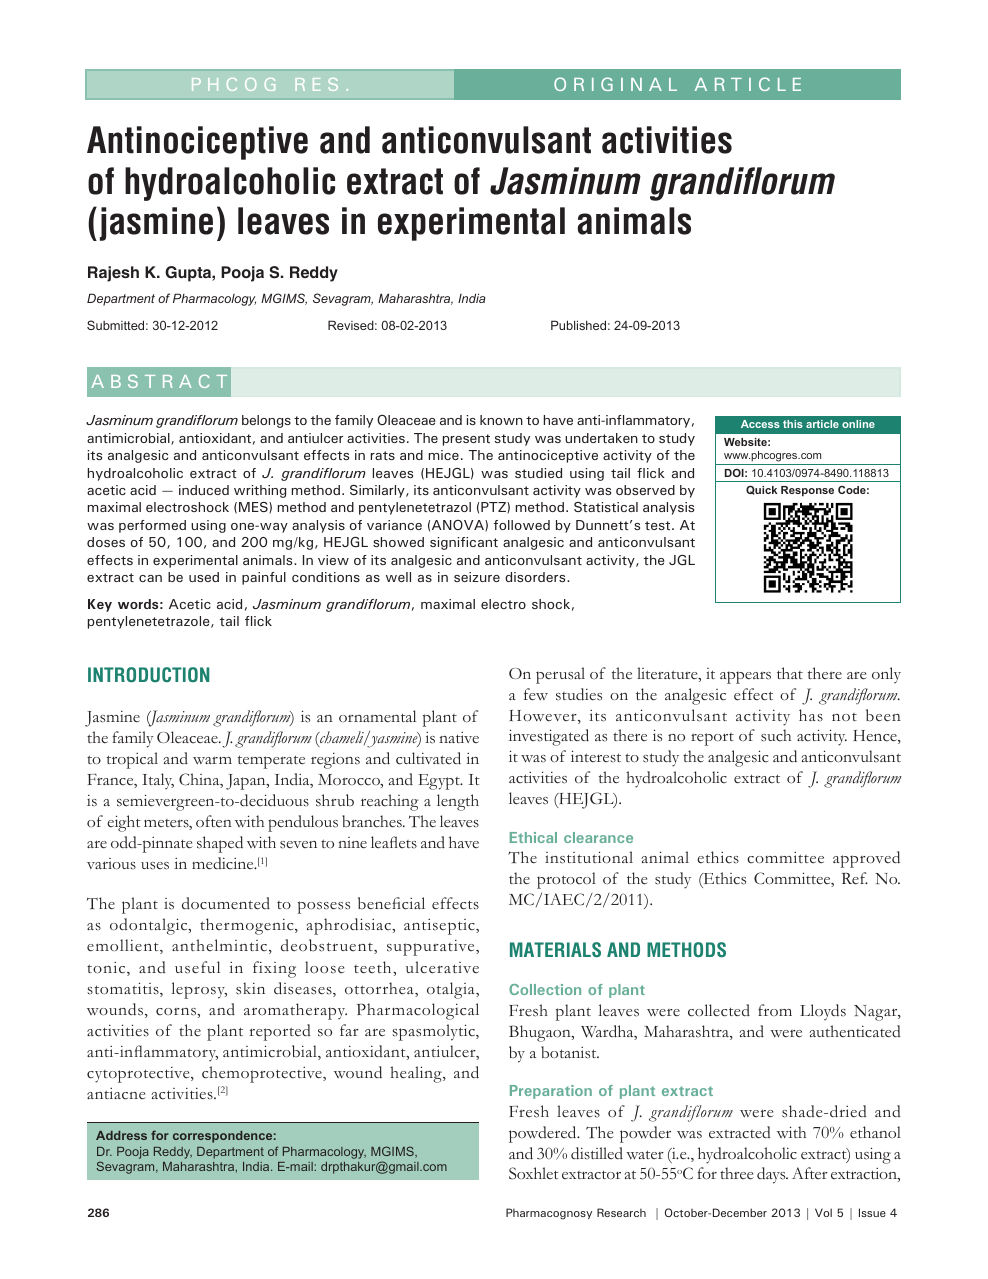 Antinociceptive and anticonvulsant activities of hydroalcoholic extract of  Jasminum grandiflorum (jasmine) leaves in experimental animals – topic of  research paper in Biological sciences. Download scholarly article PDF and  read for free on